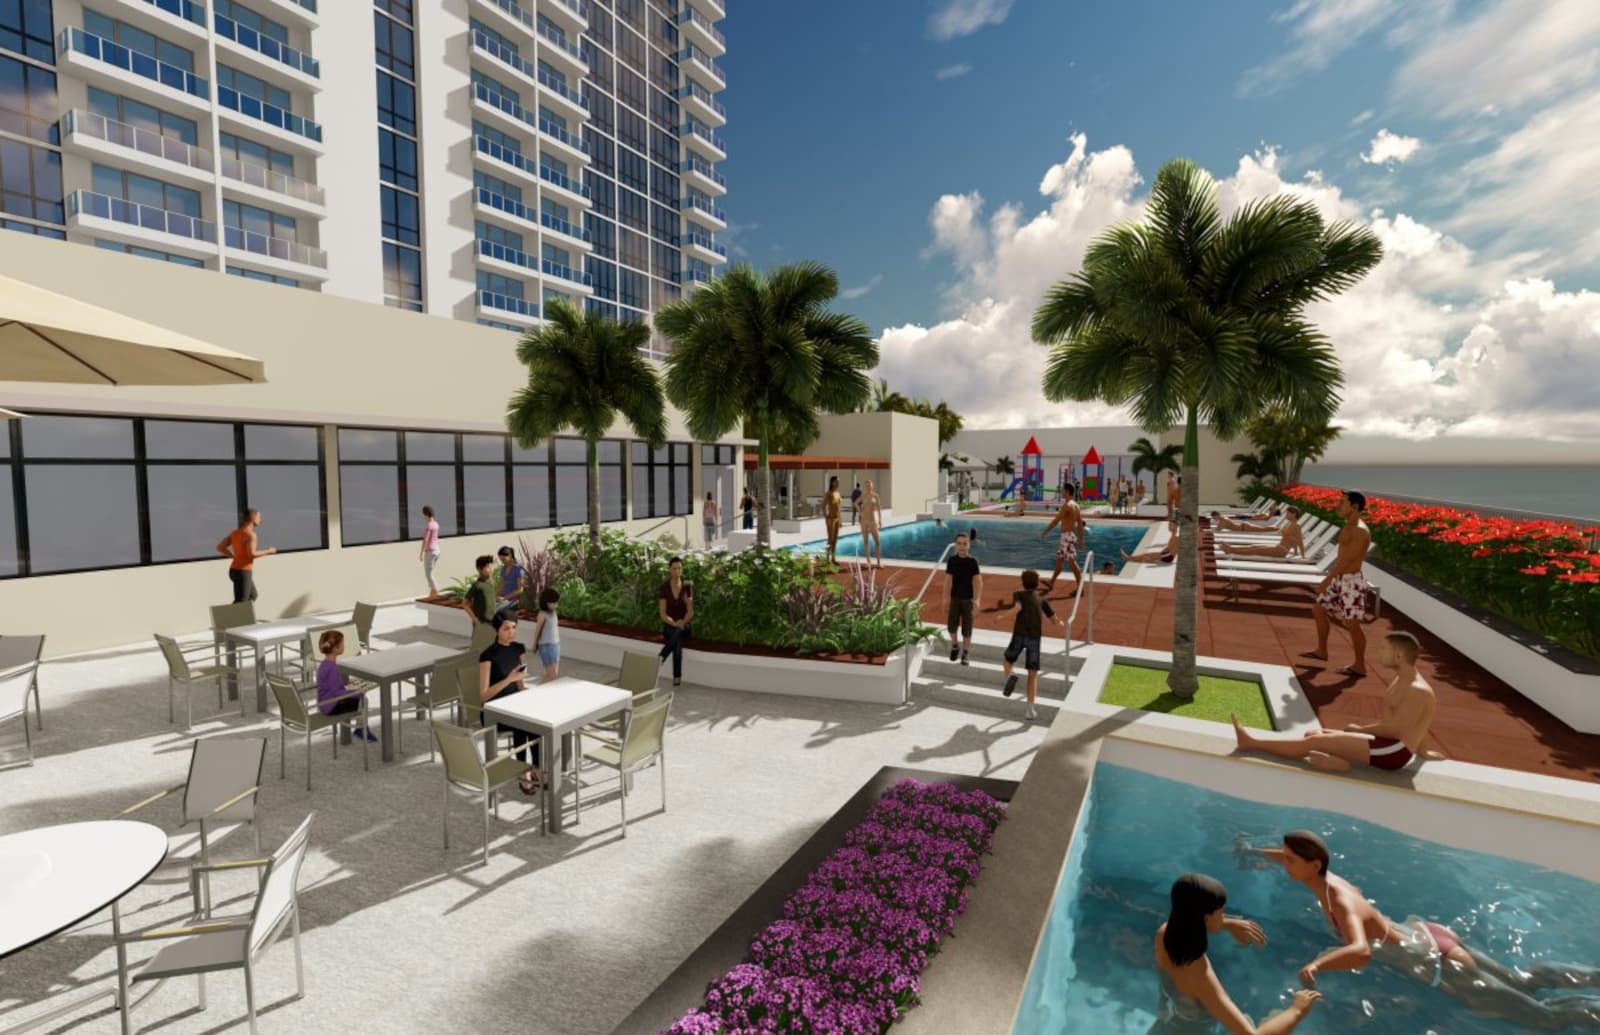 Rendering of the recreation deck on The Central Ala Moana